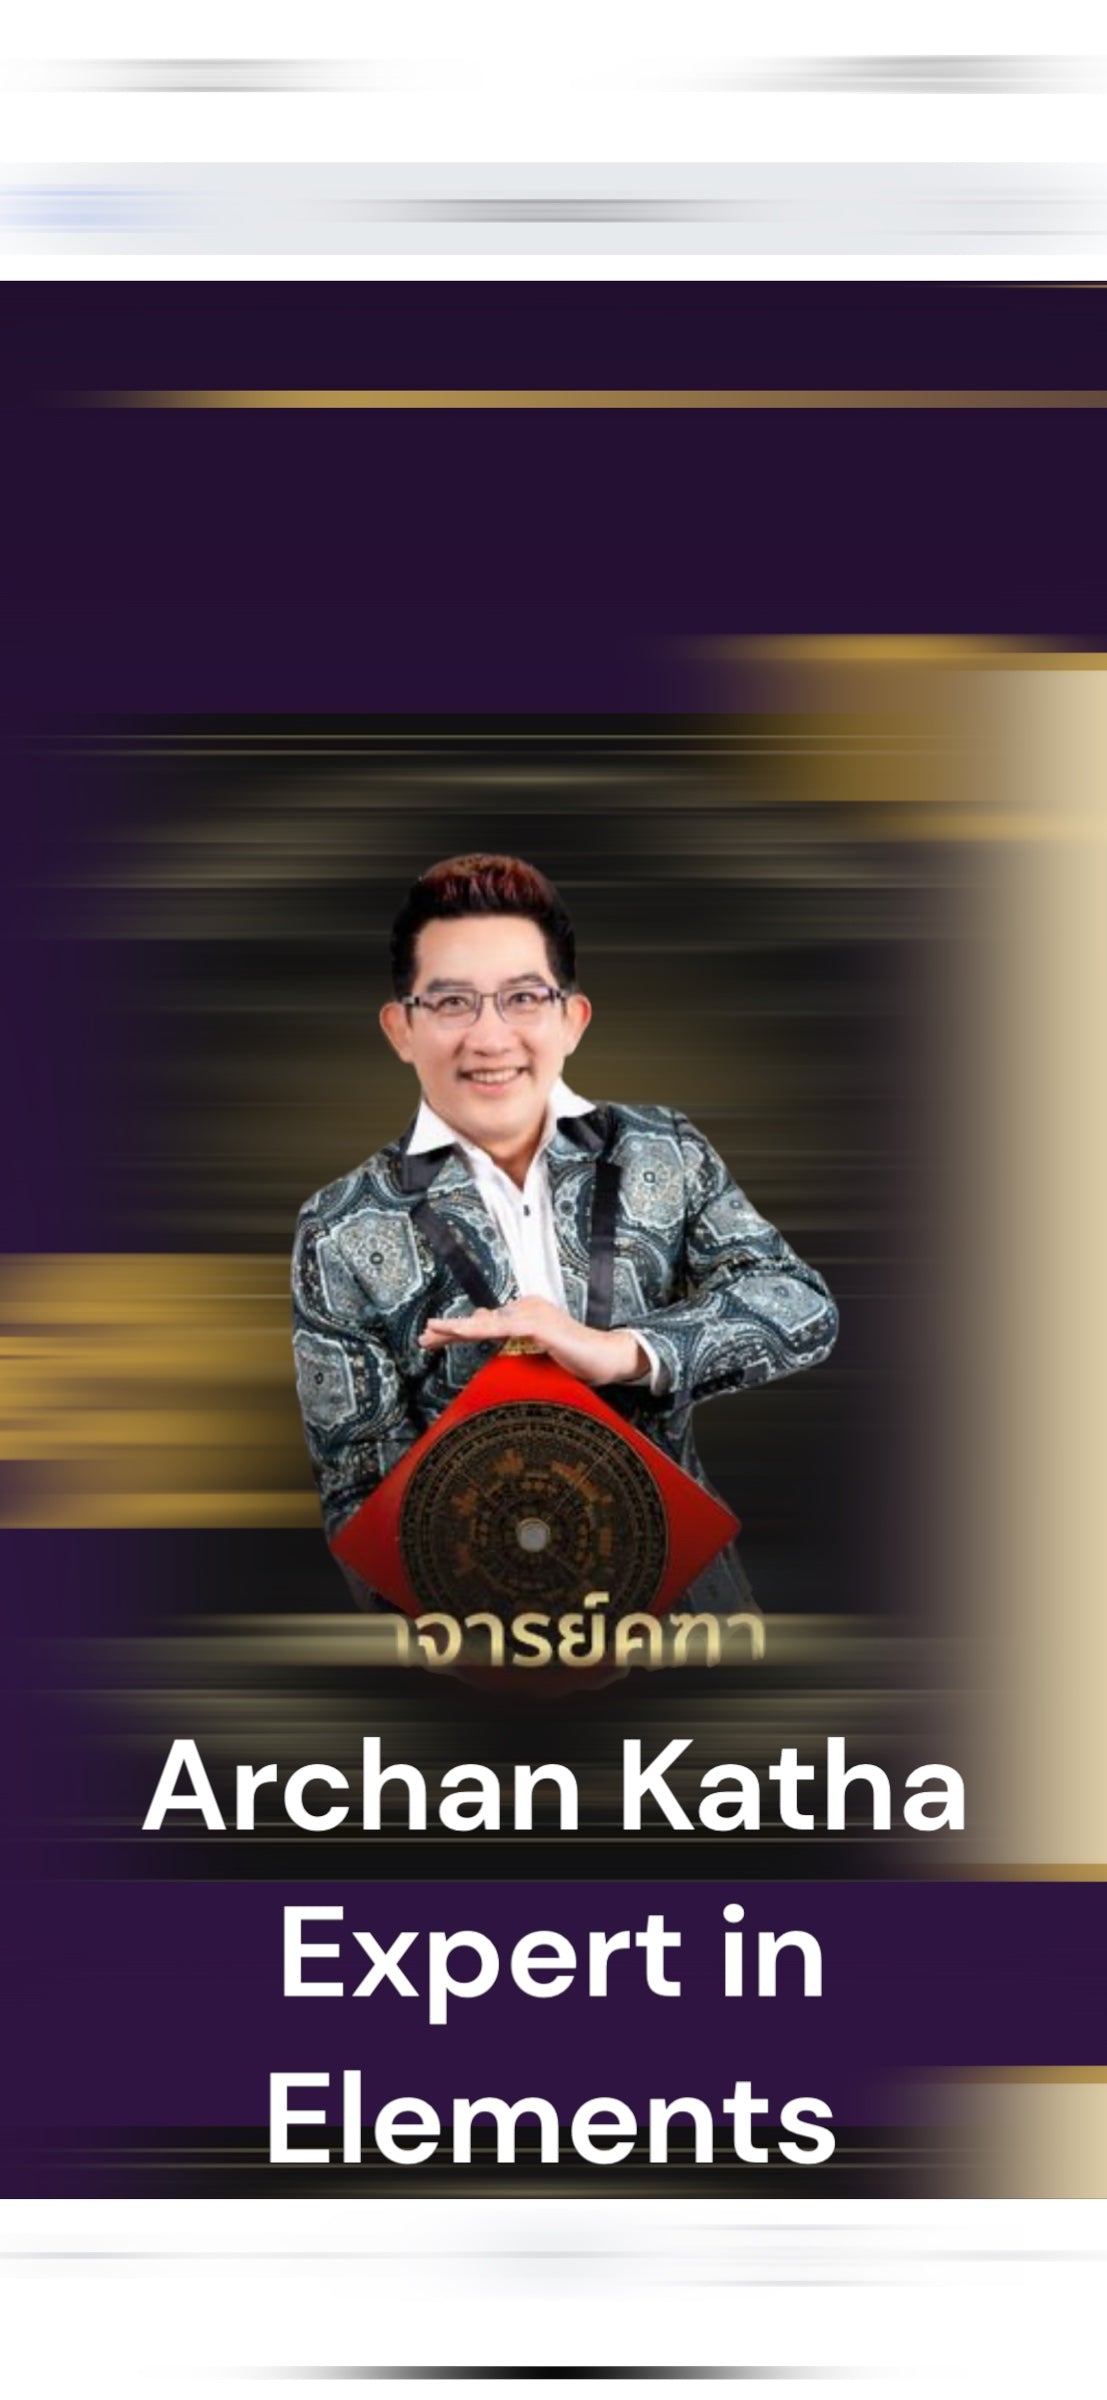 💰WEALTH💰👷‍♂️🧑‍🚒PROTECTION👷‍♂️Expert astrologists in Thailand have collaborated to create a special digital wallpaper for all phone models, featuring a customized image of TAOWESUWAN.